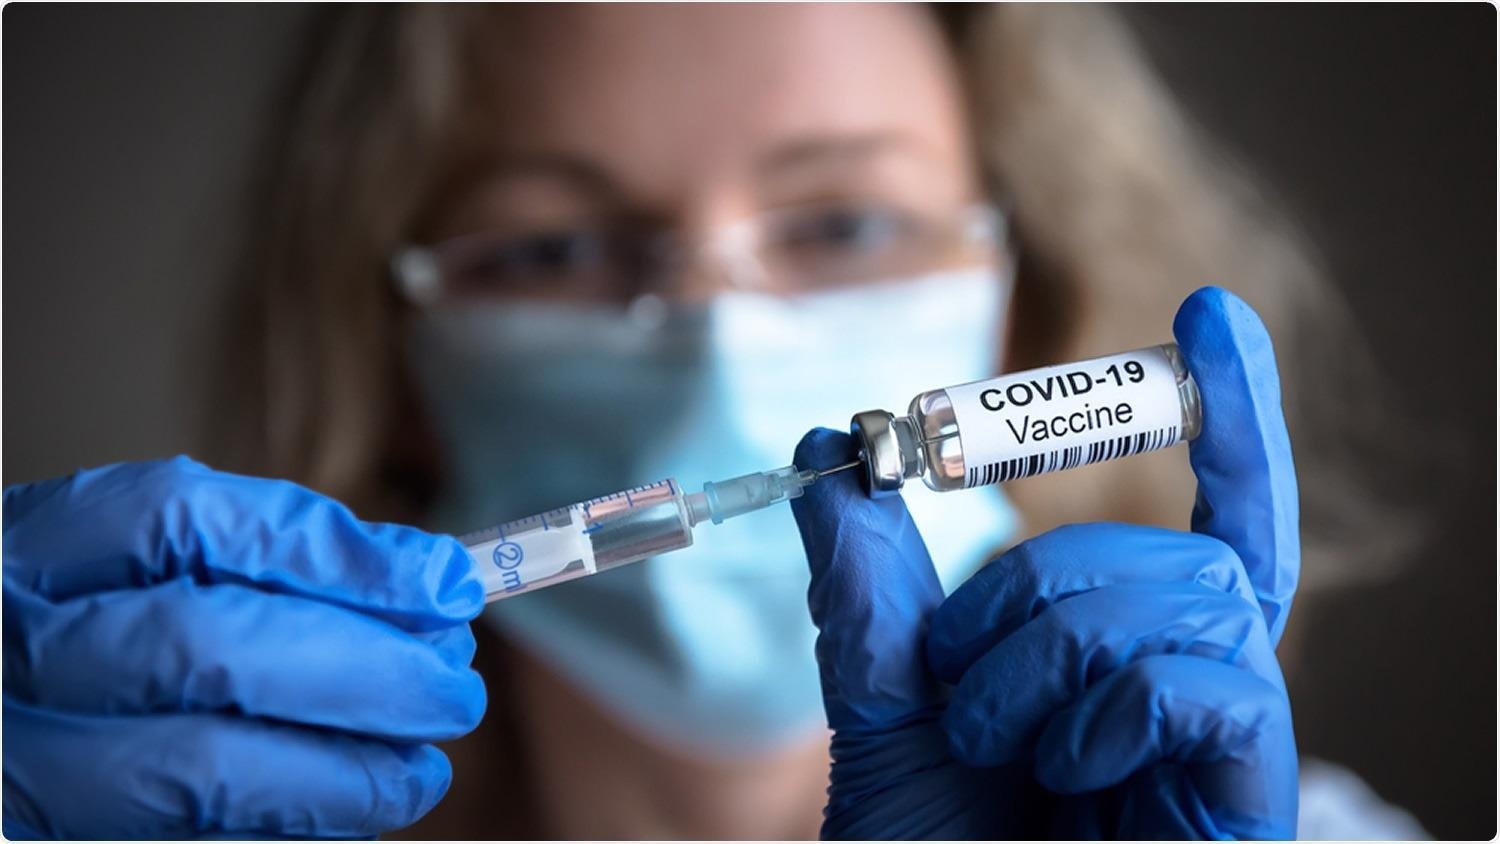 Study: Heterologous versus homologous COVID-19 booster vaccination in previous recipients of two doses of CoronaVac COVID-19 vaccine in Brazil (RHH-001): a phase 4, non-inferiority, single blind, randomised study. Image Credit: Viacheslav Lopatin / Shutterstock